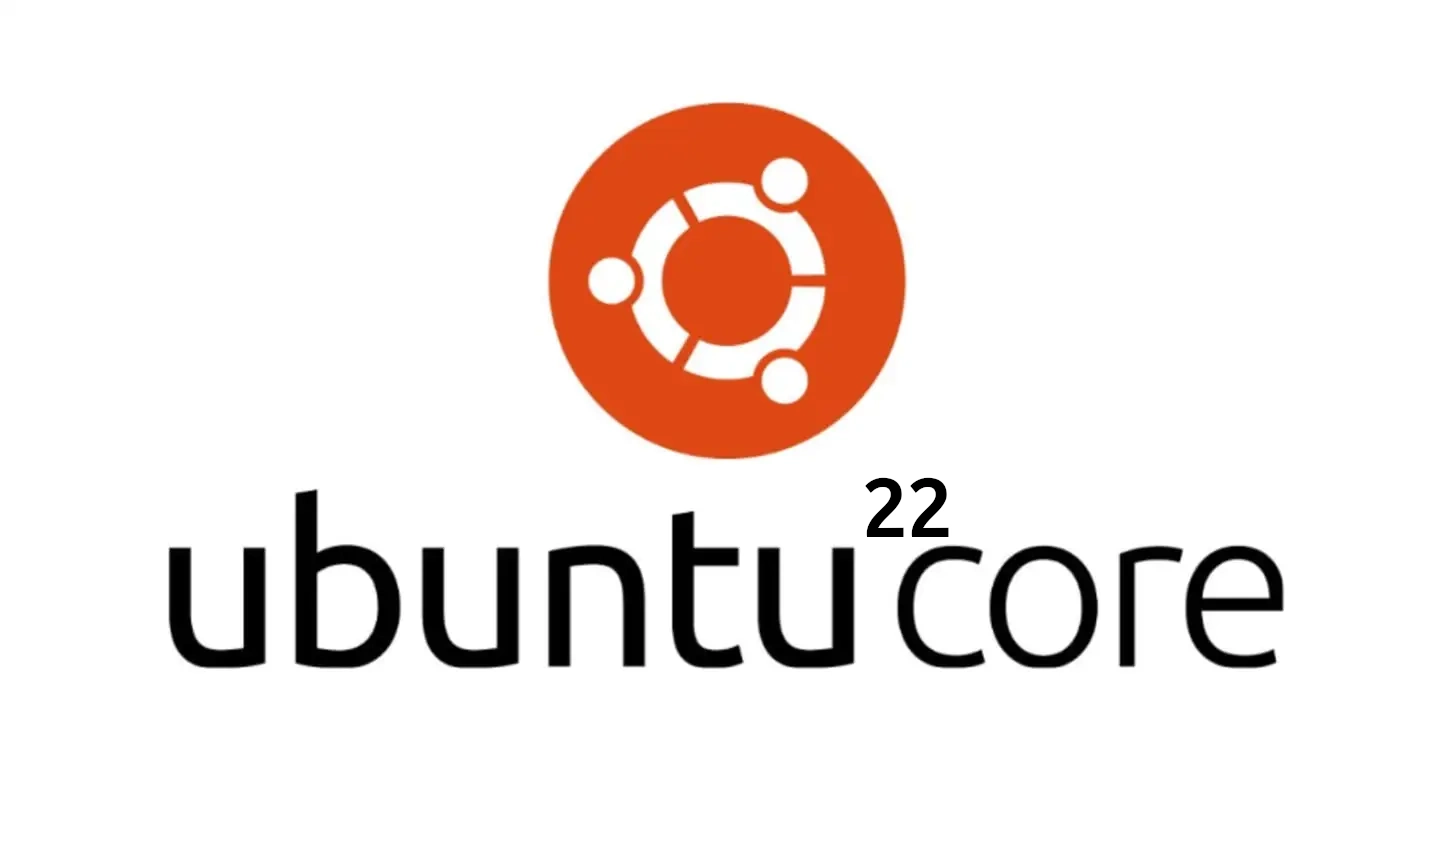 Canonical Releases Ubuntu Core 22 for IoT, Edge and Embedded Devices